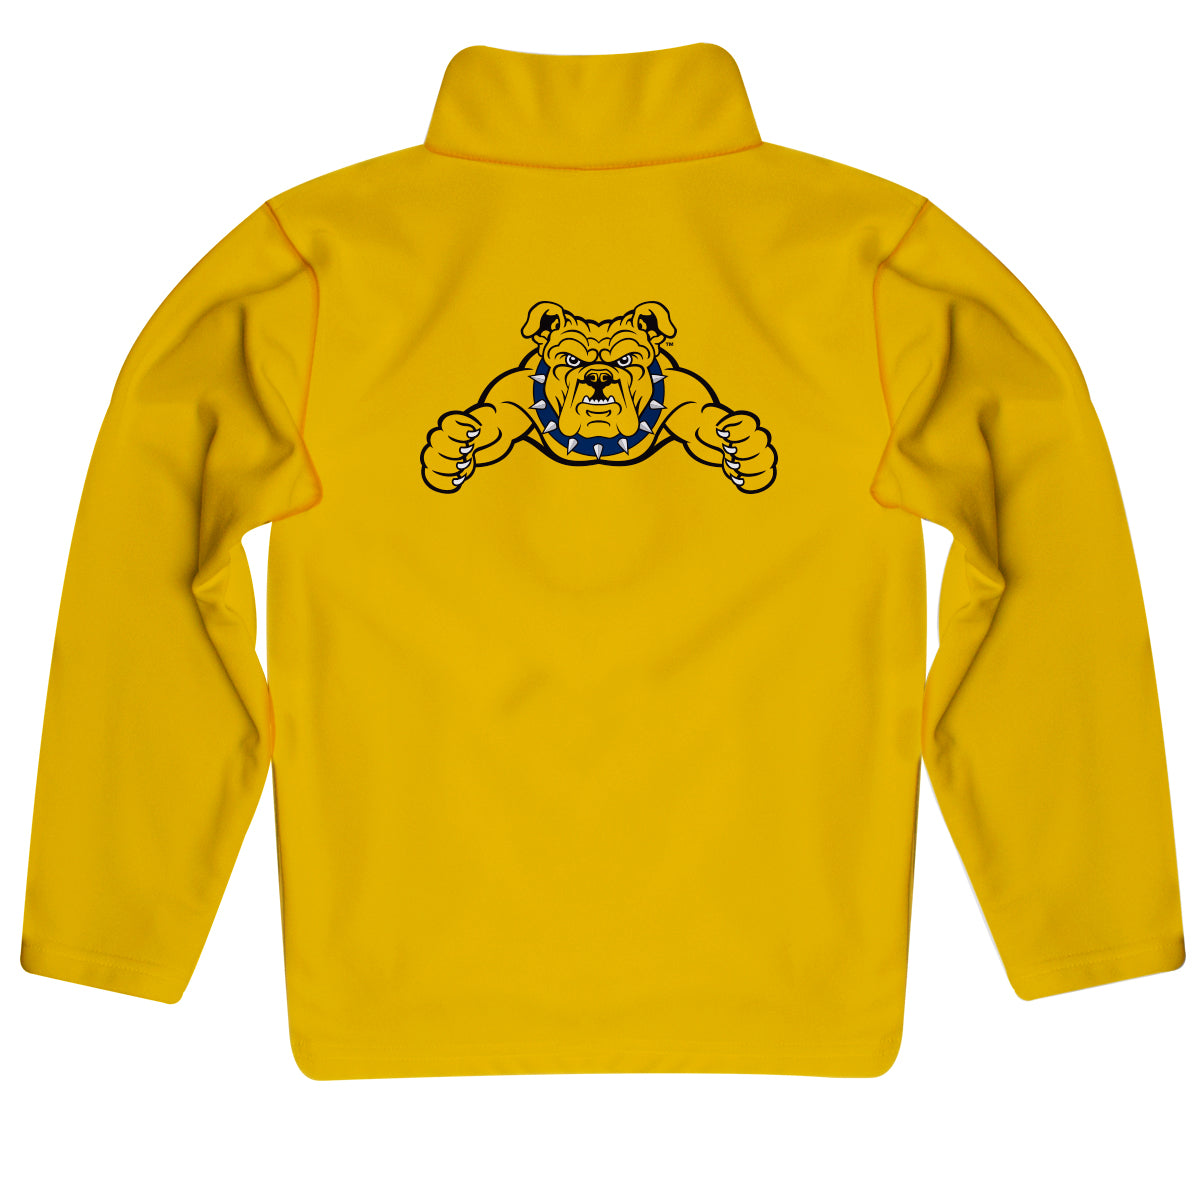 North Carolina A&T Aggies Game Day Solid Gold Quarter Zip Pullover for Infants Toddlers by Vive La Fete